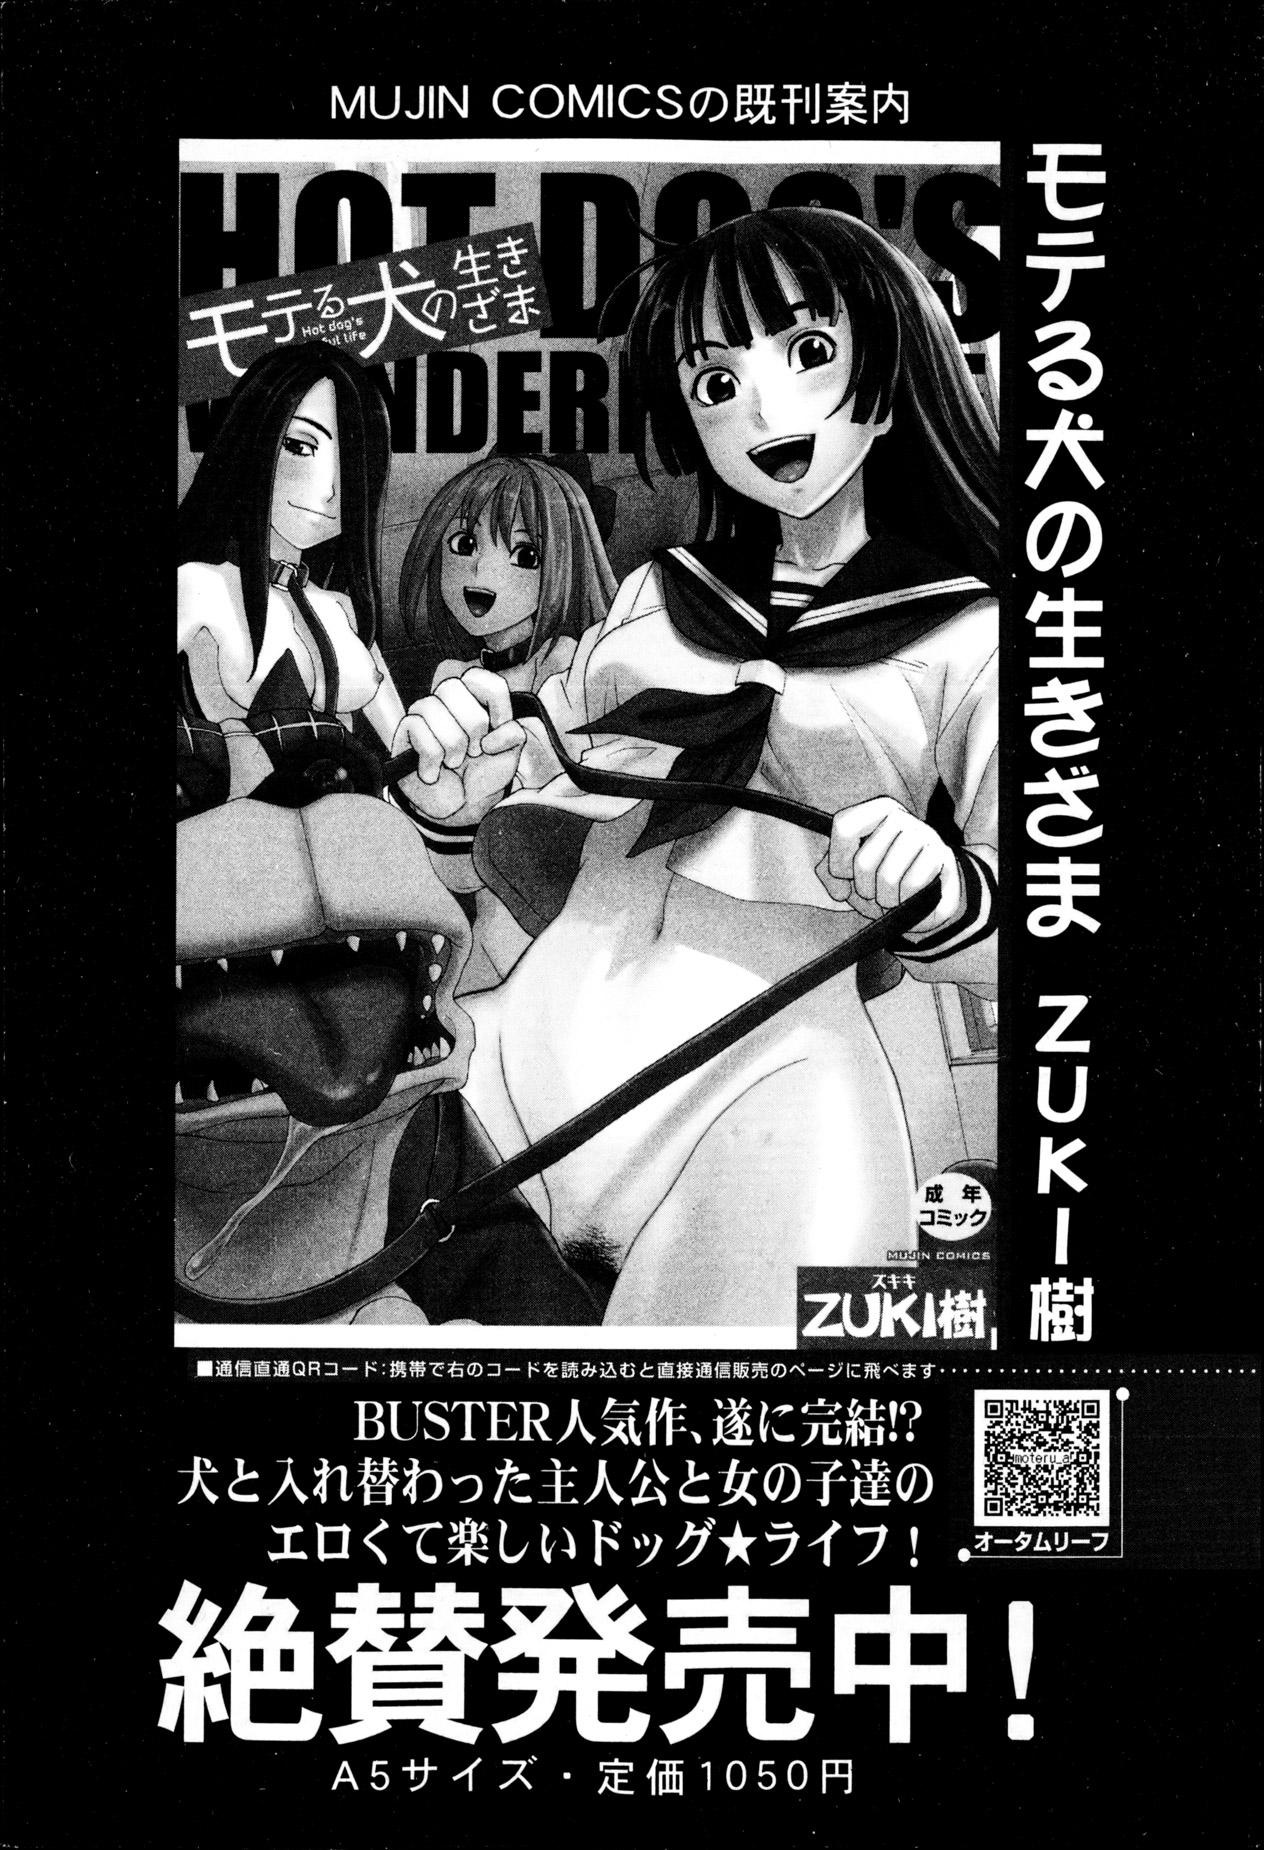 BUSTER COMIC 2013-05 261